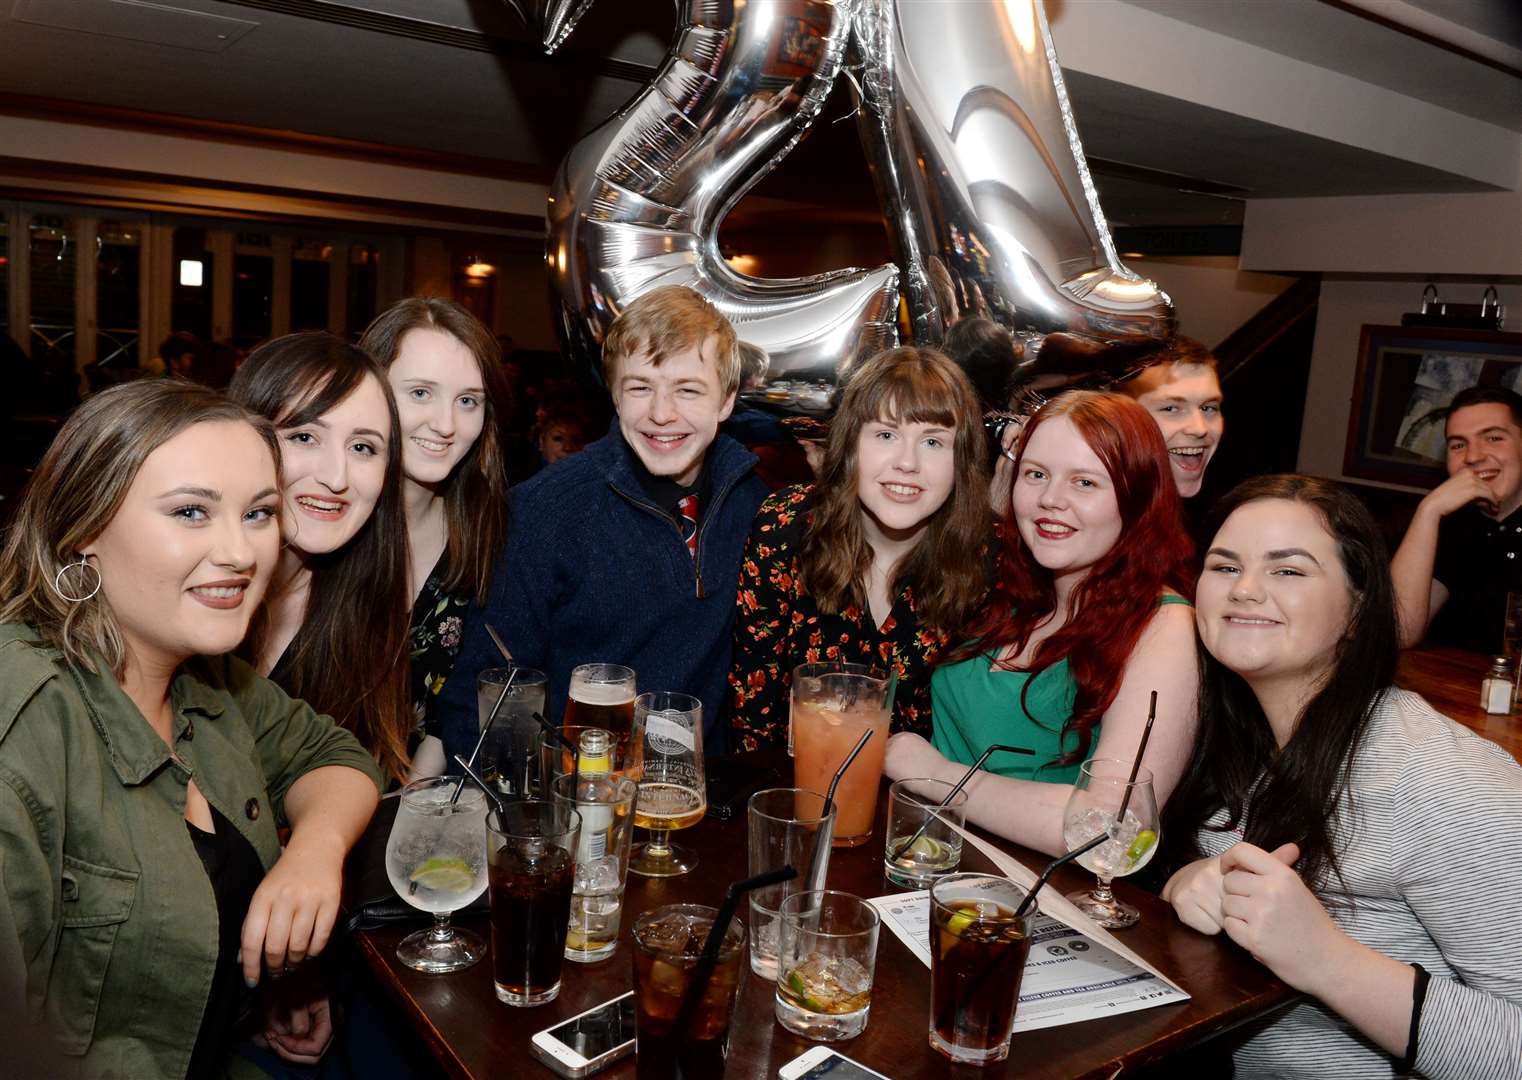 Shannon Cameron (centre right) parties on her 21st birthday with friends.